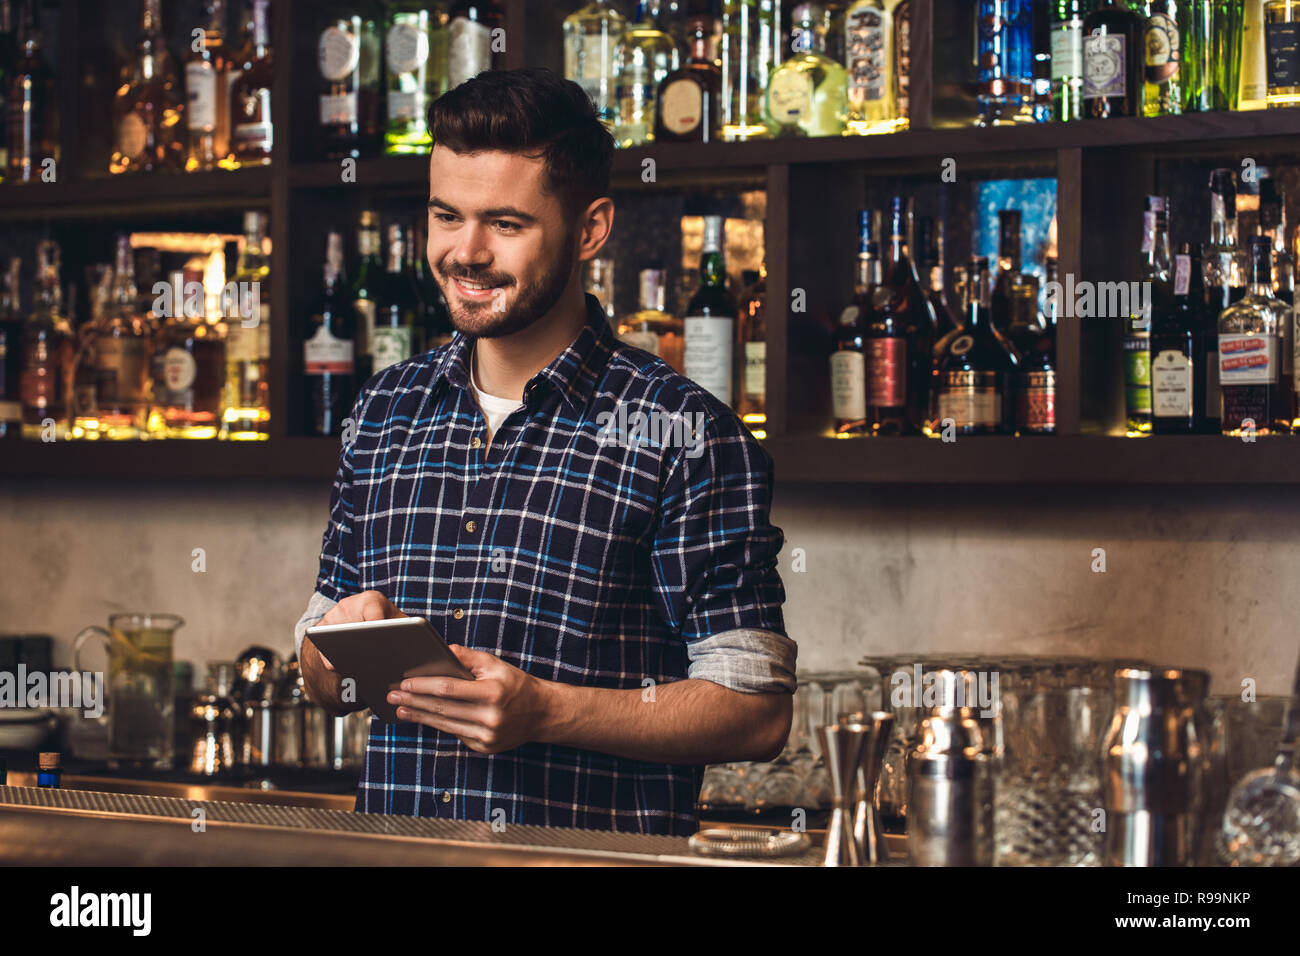 Young barman standing at bar counter placing order on digital tablet looking at client smiling cheerful Stock Photo